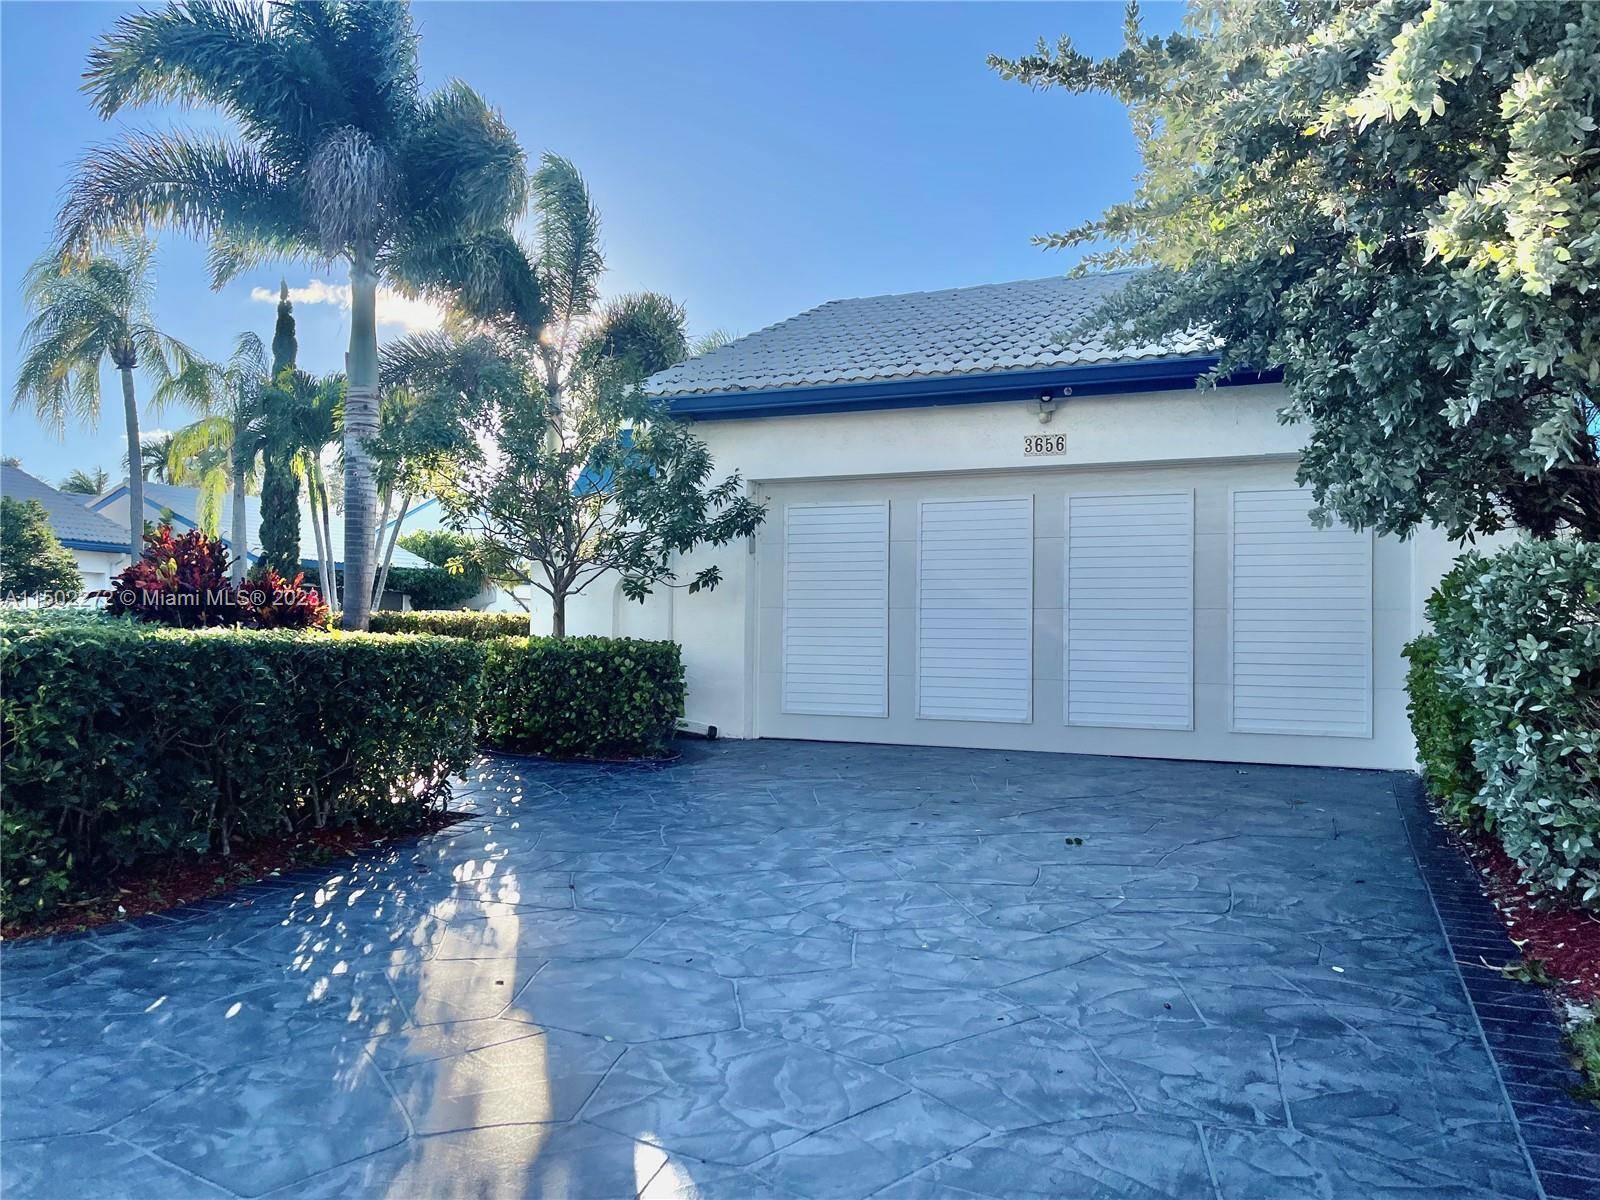 GORGEOUS single story modern home in Boca Golf and Tennis Club, fully hurricane proof with a saltwater pool and marble deck WITH PRE DRILLED HOLES IN GROUND FOR EASY POOL ...